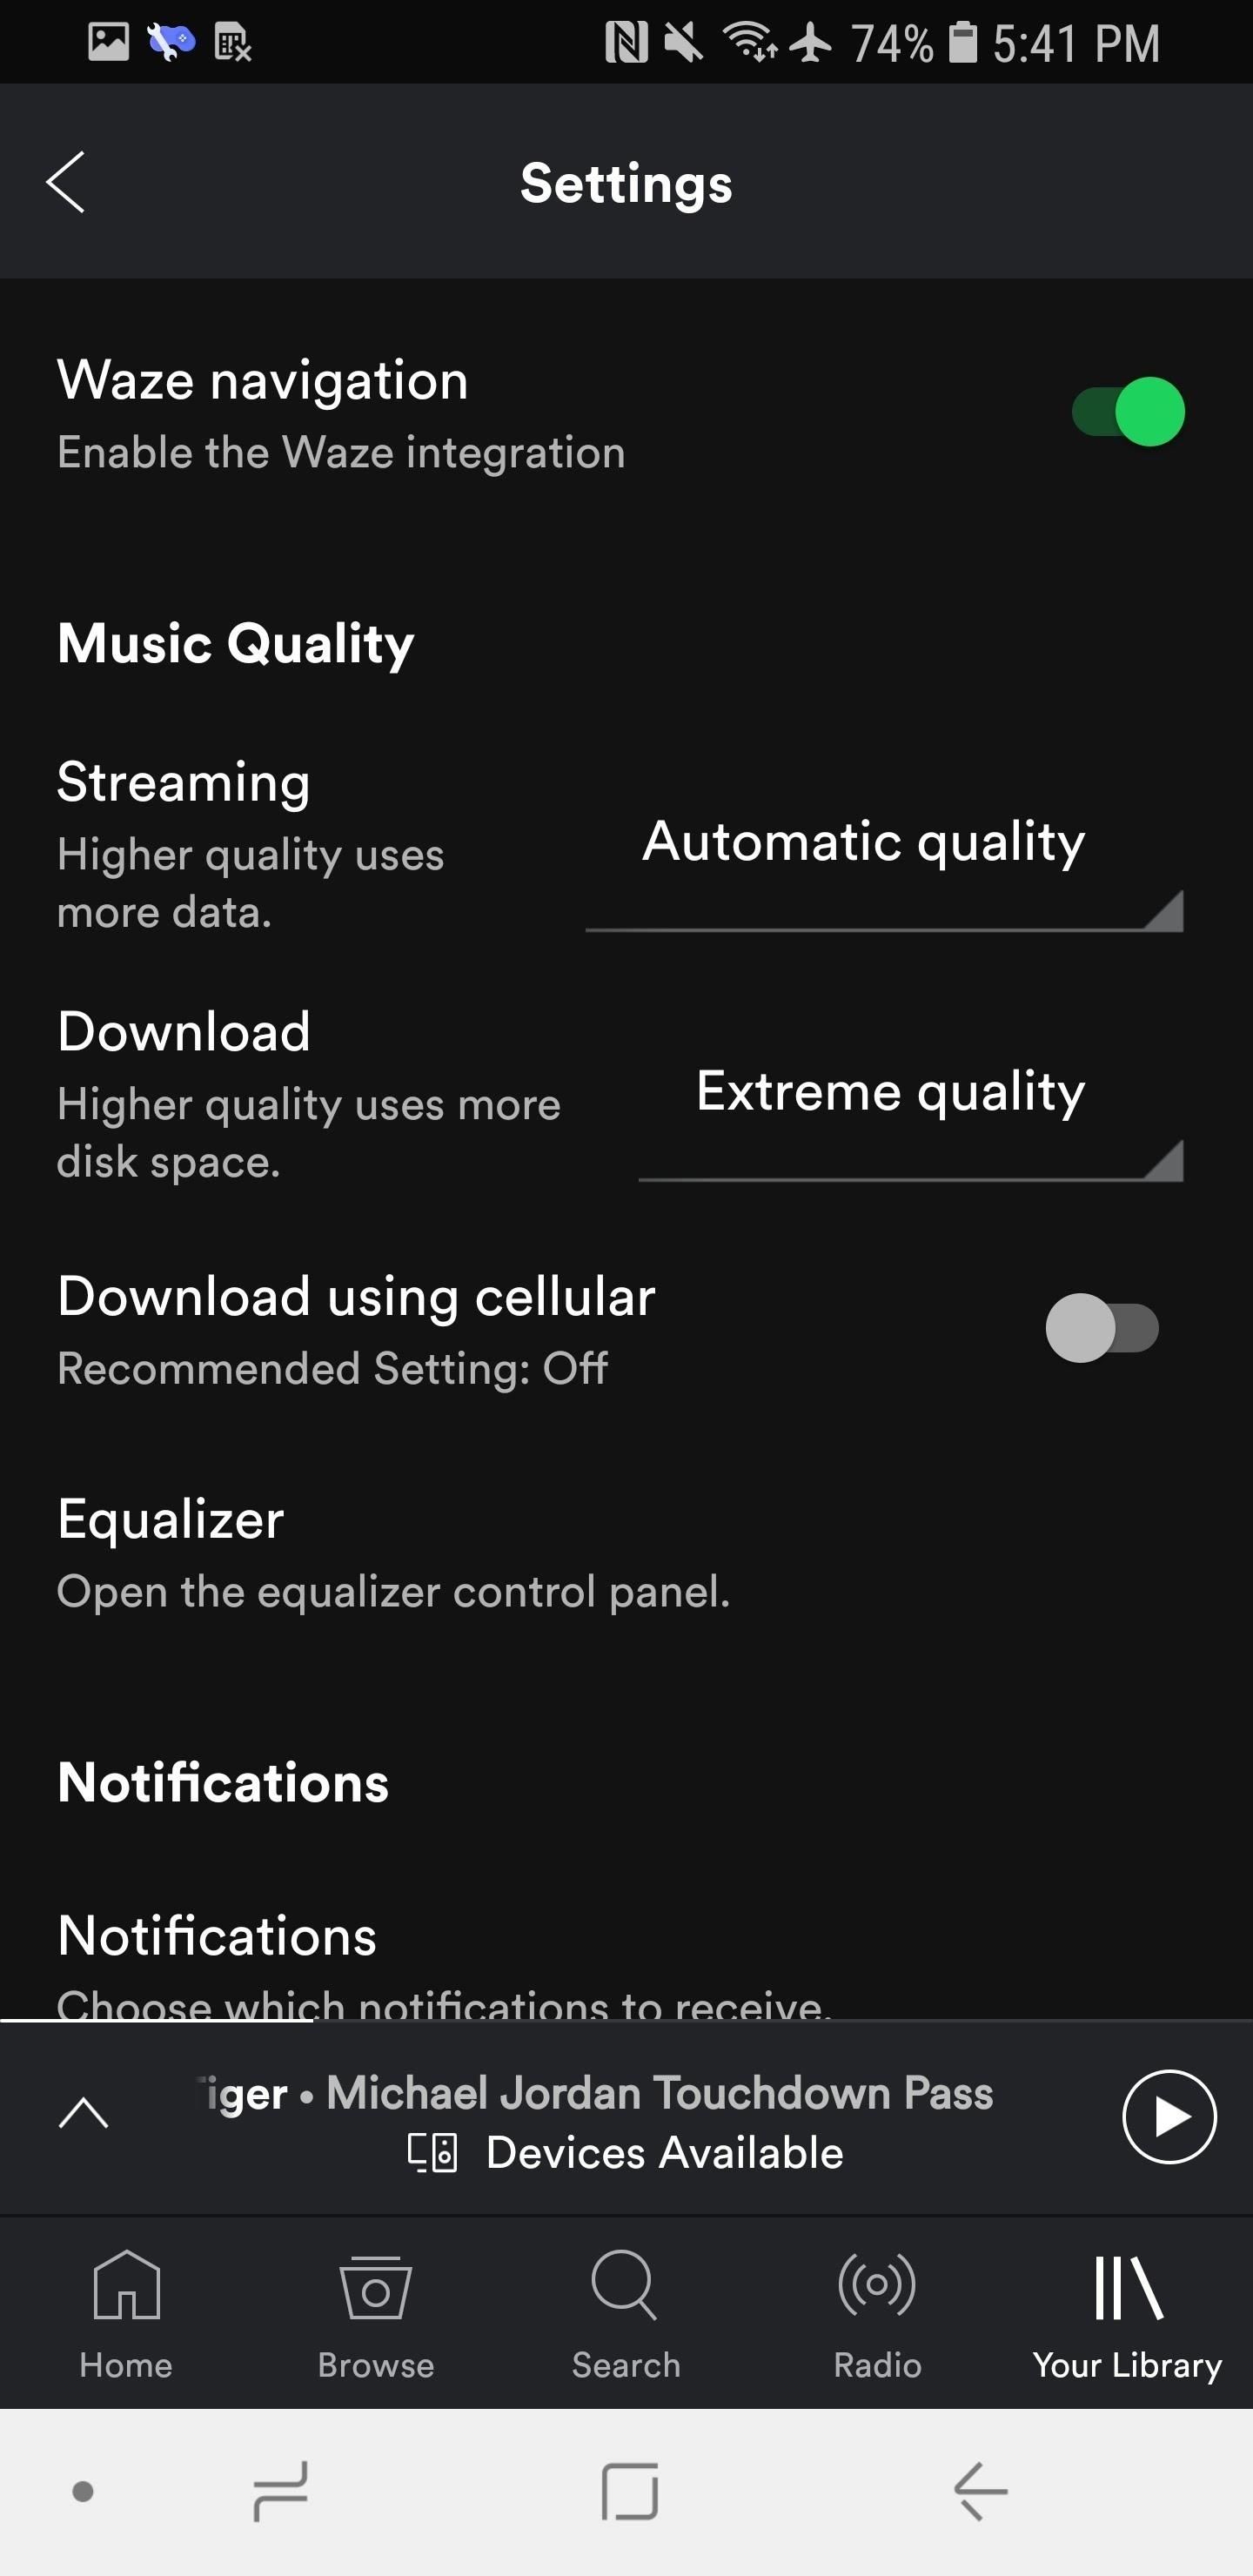 Spotify 101: How to Save Cellular Data When Streaming Music on Your iPhone or Android Phone